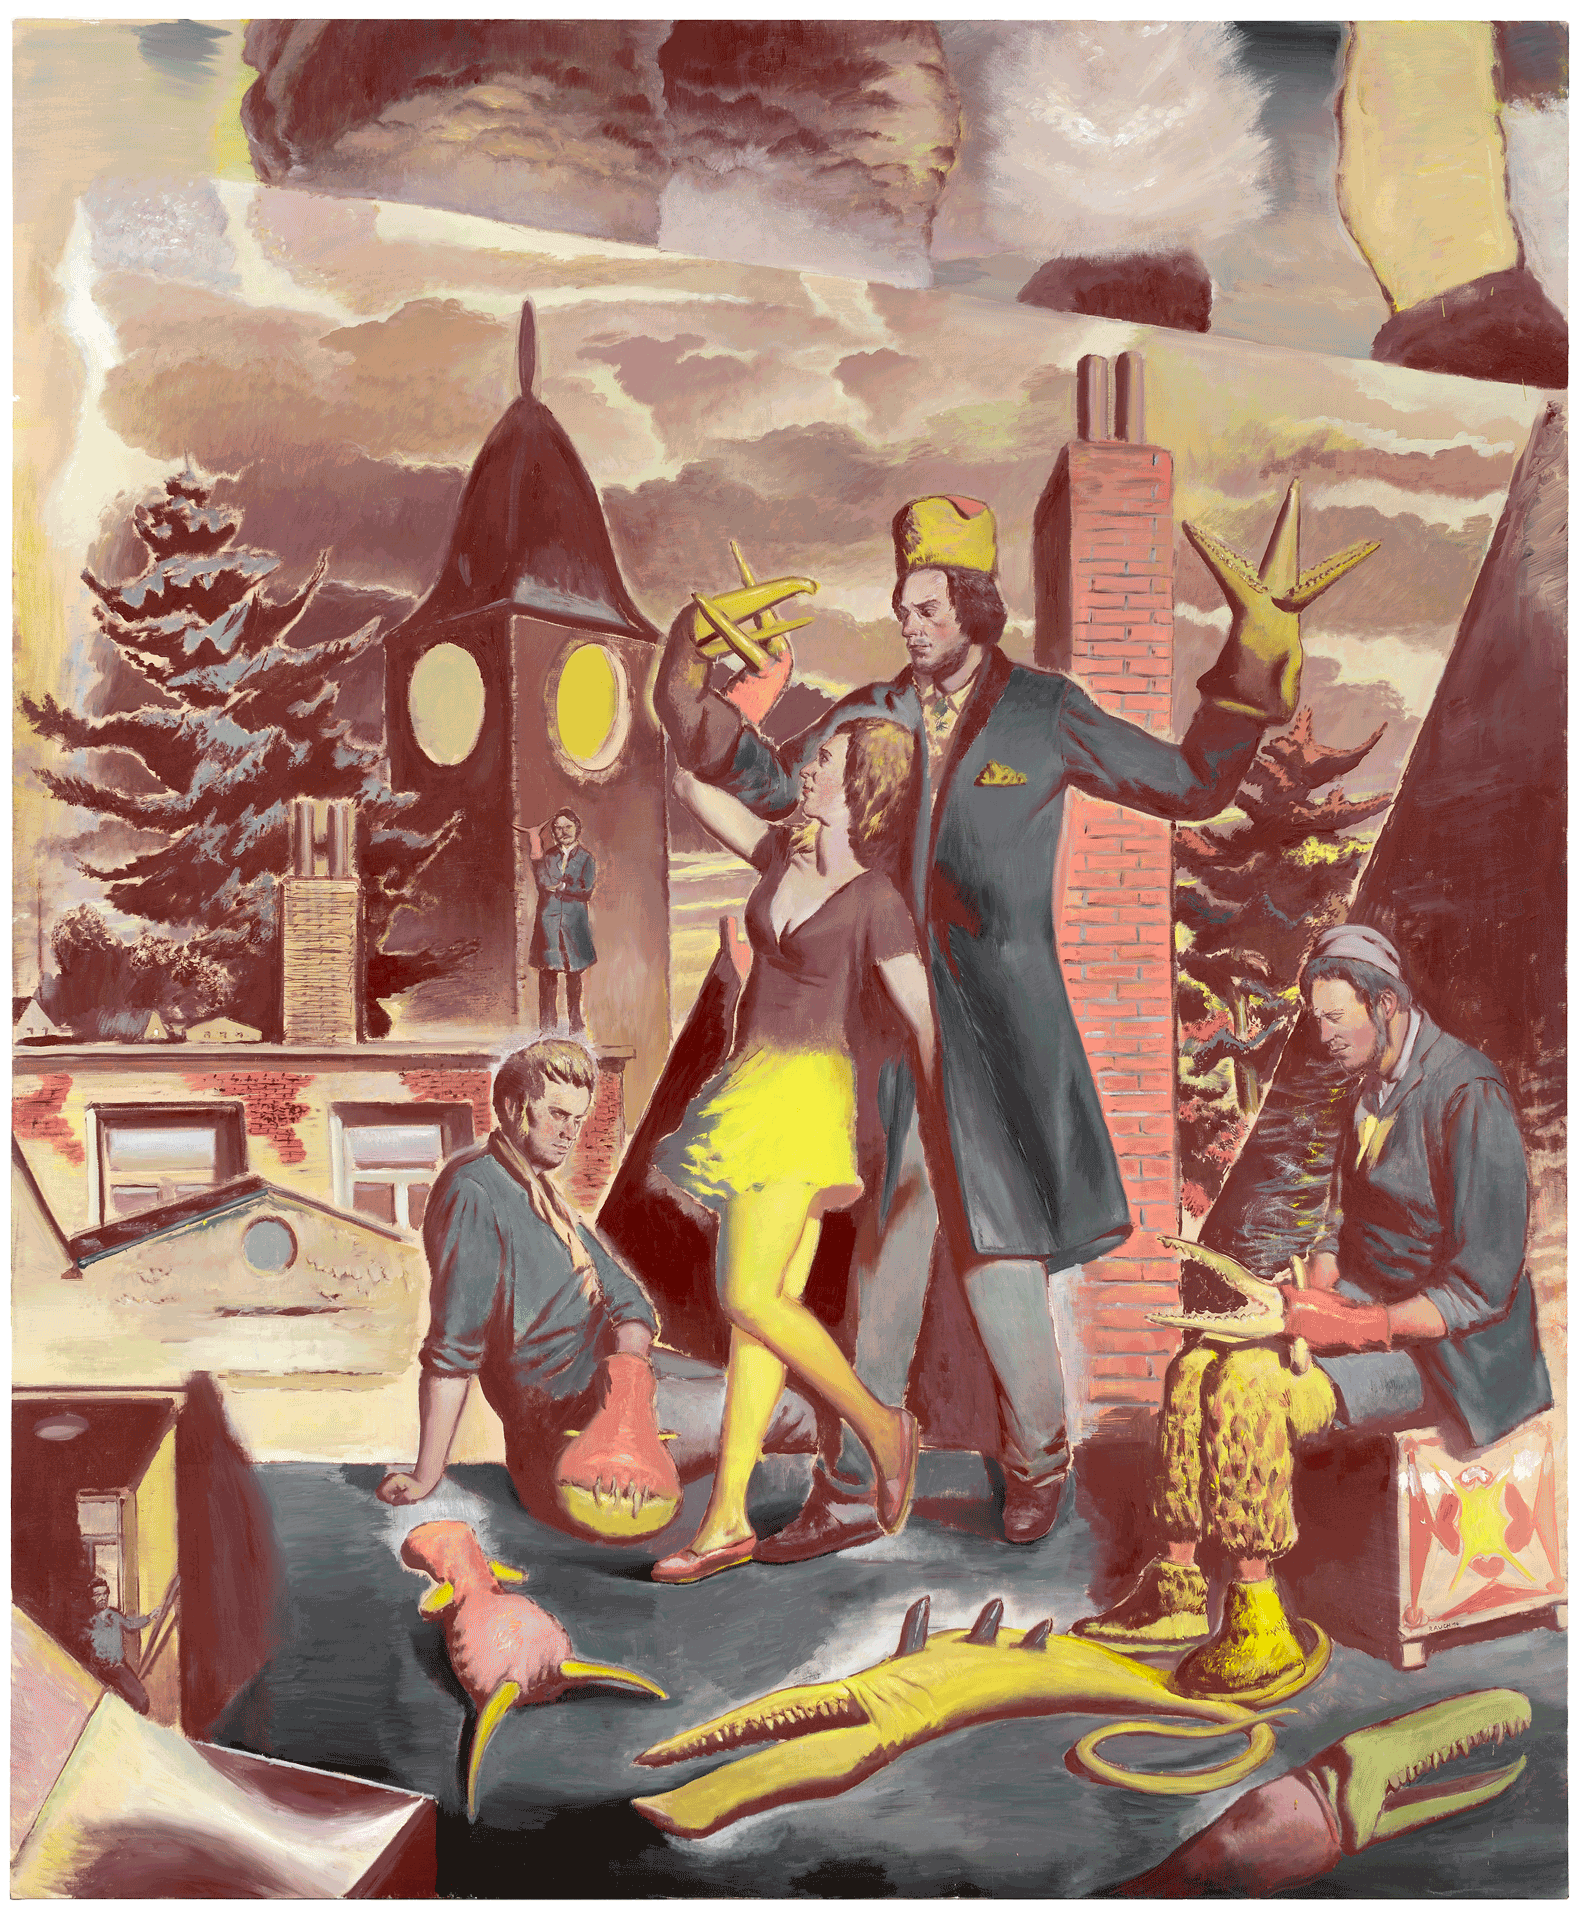 A painting by Neo Rauch, titled Uber den Dachern, dated 2014.